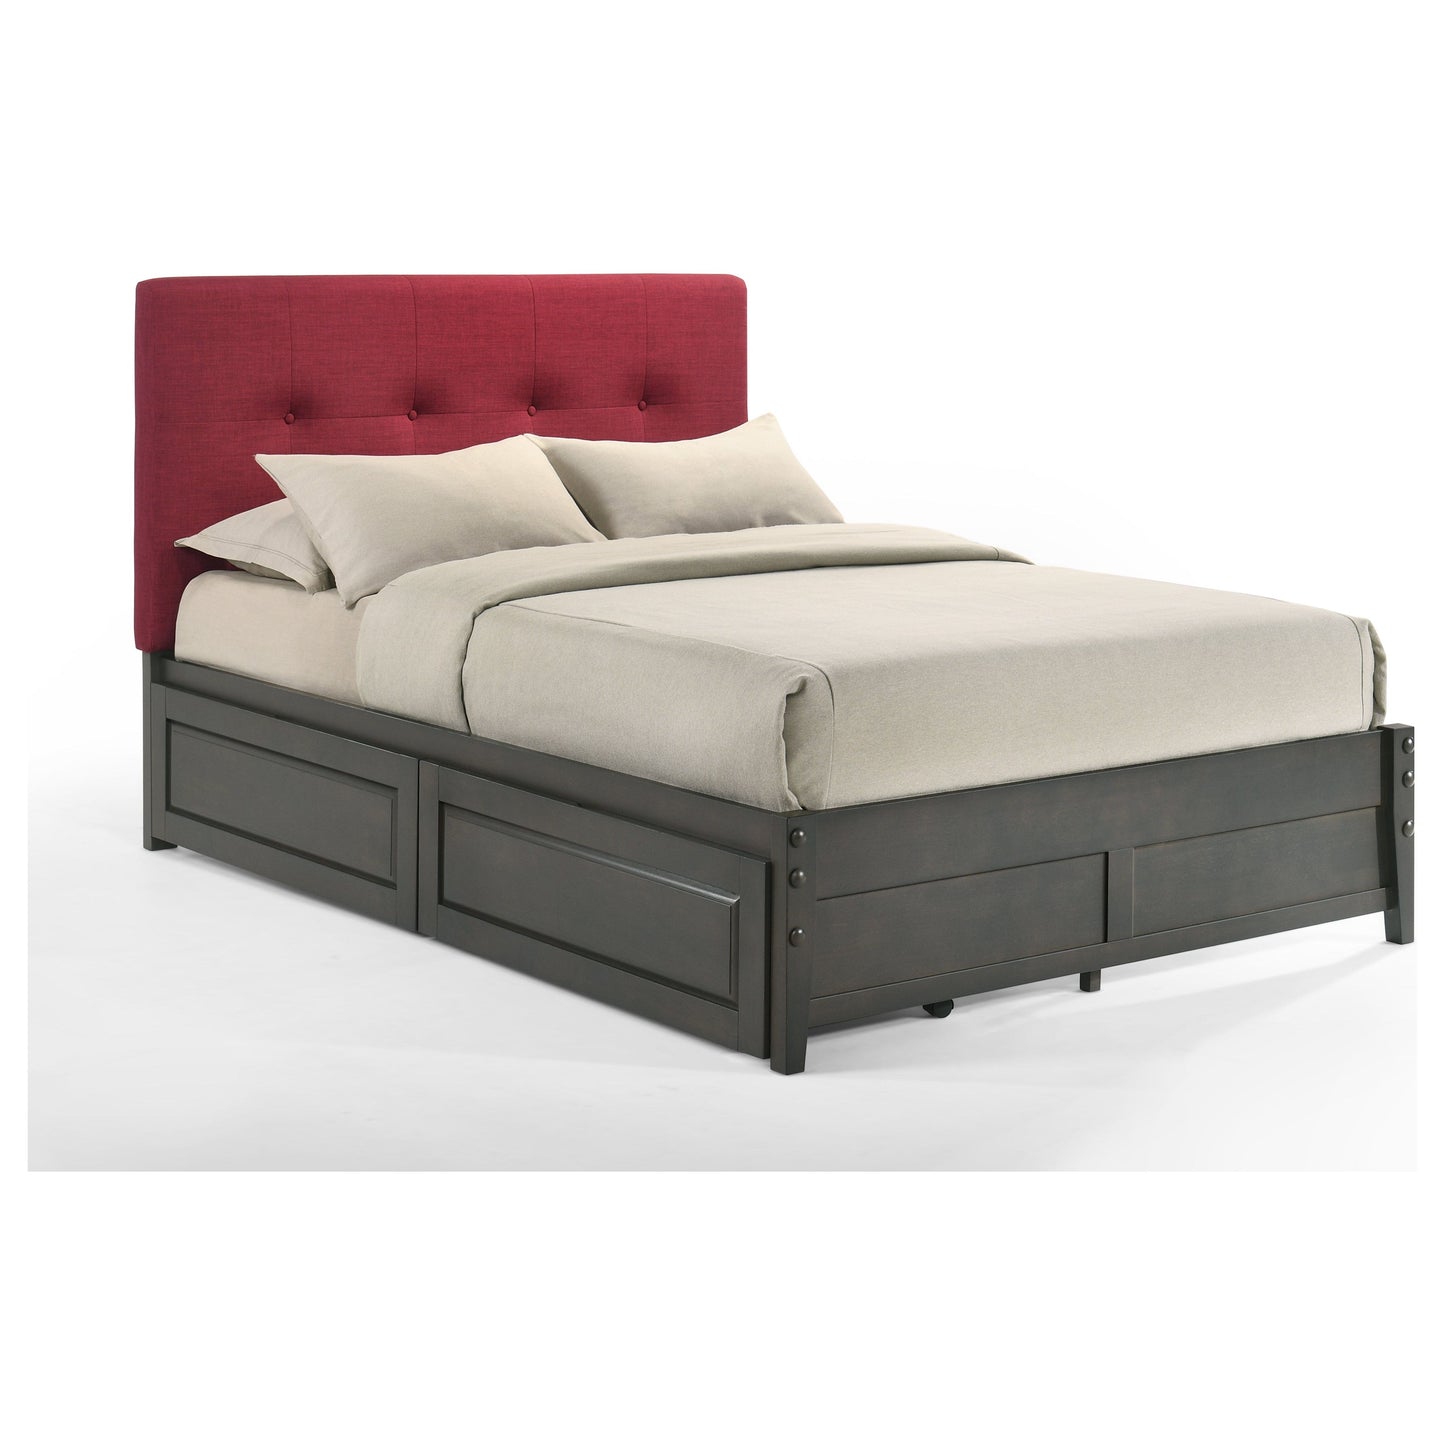 Night and Day Paprika King Bed in Red with Stonewash Finish Frame (K Series)